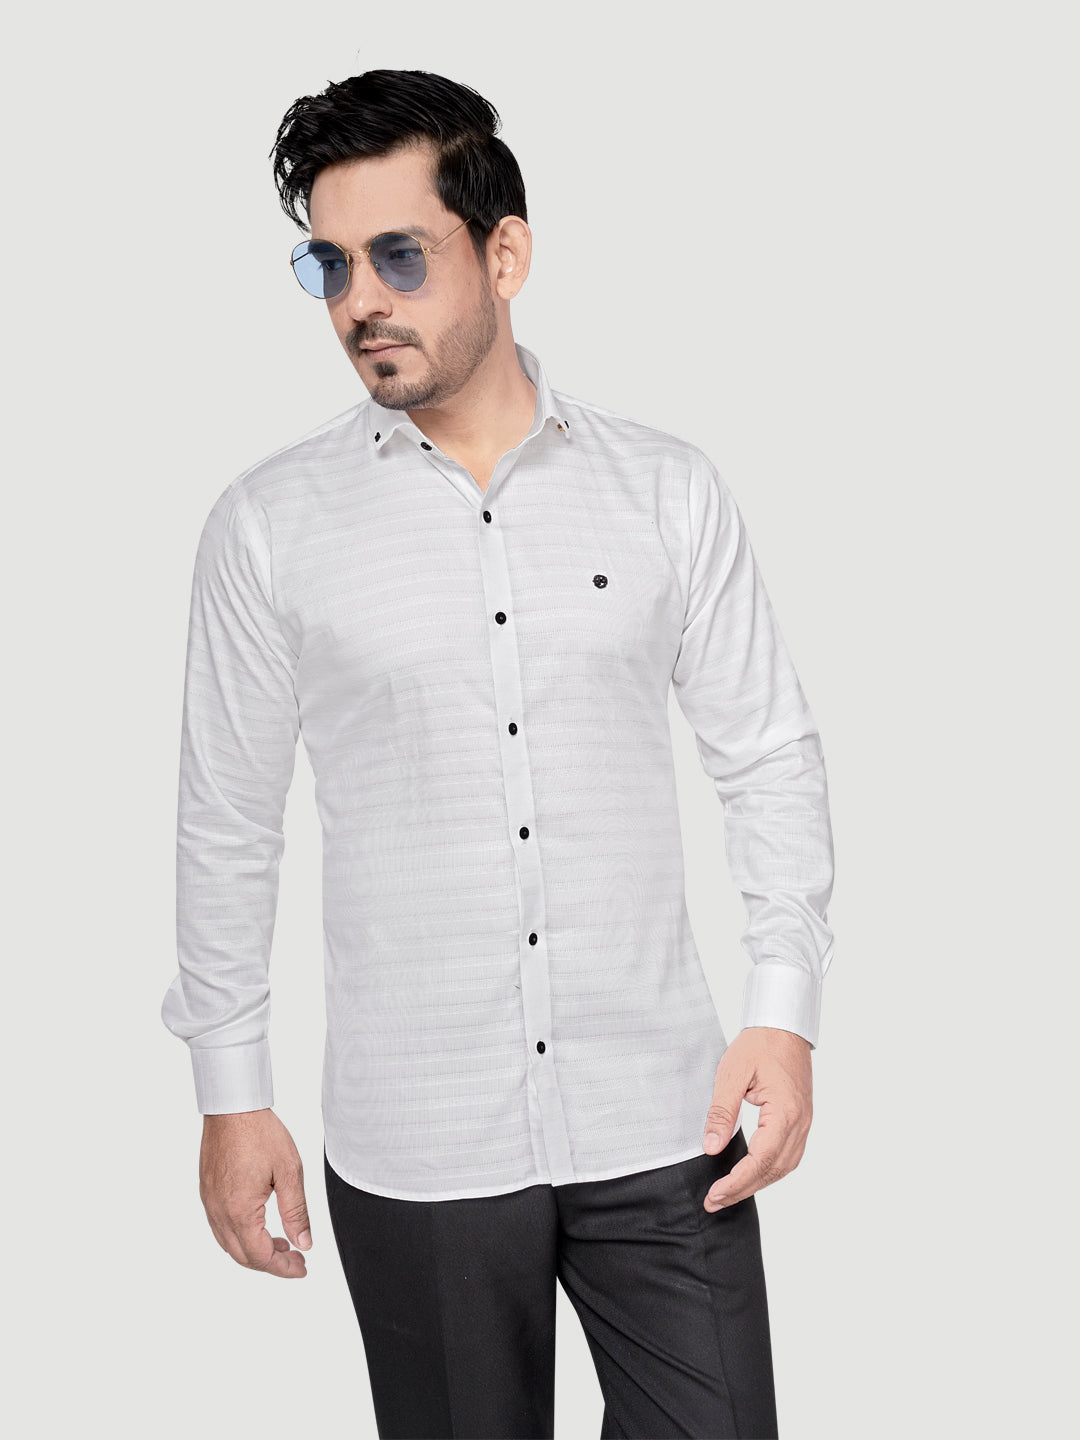 Designer Weft Shirt with Metal Buttons